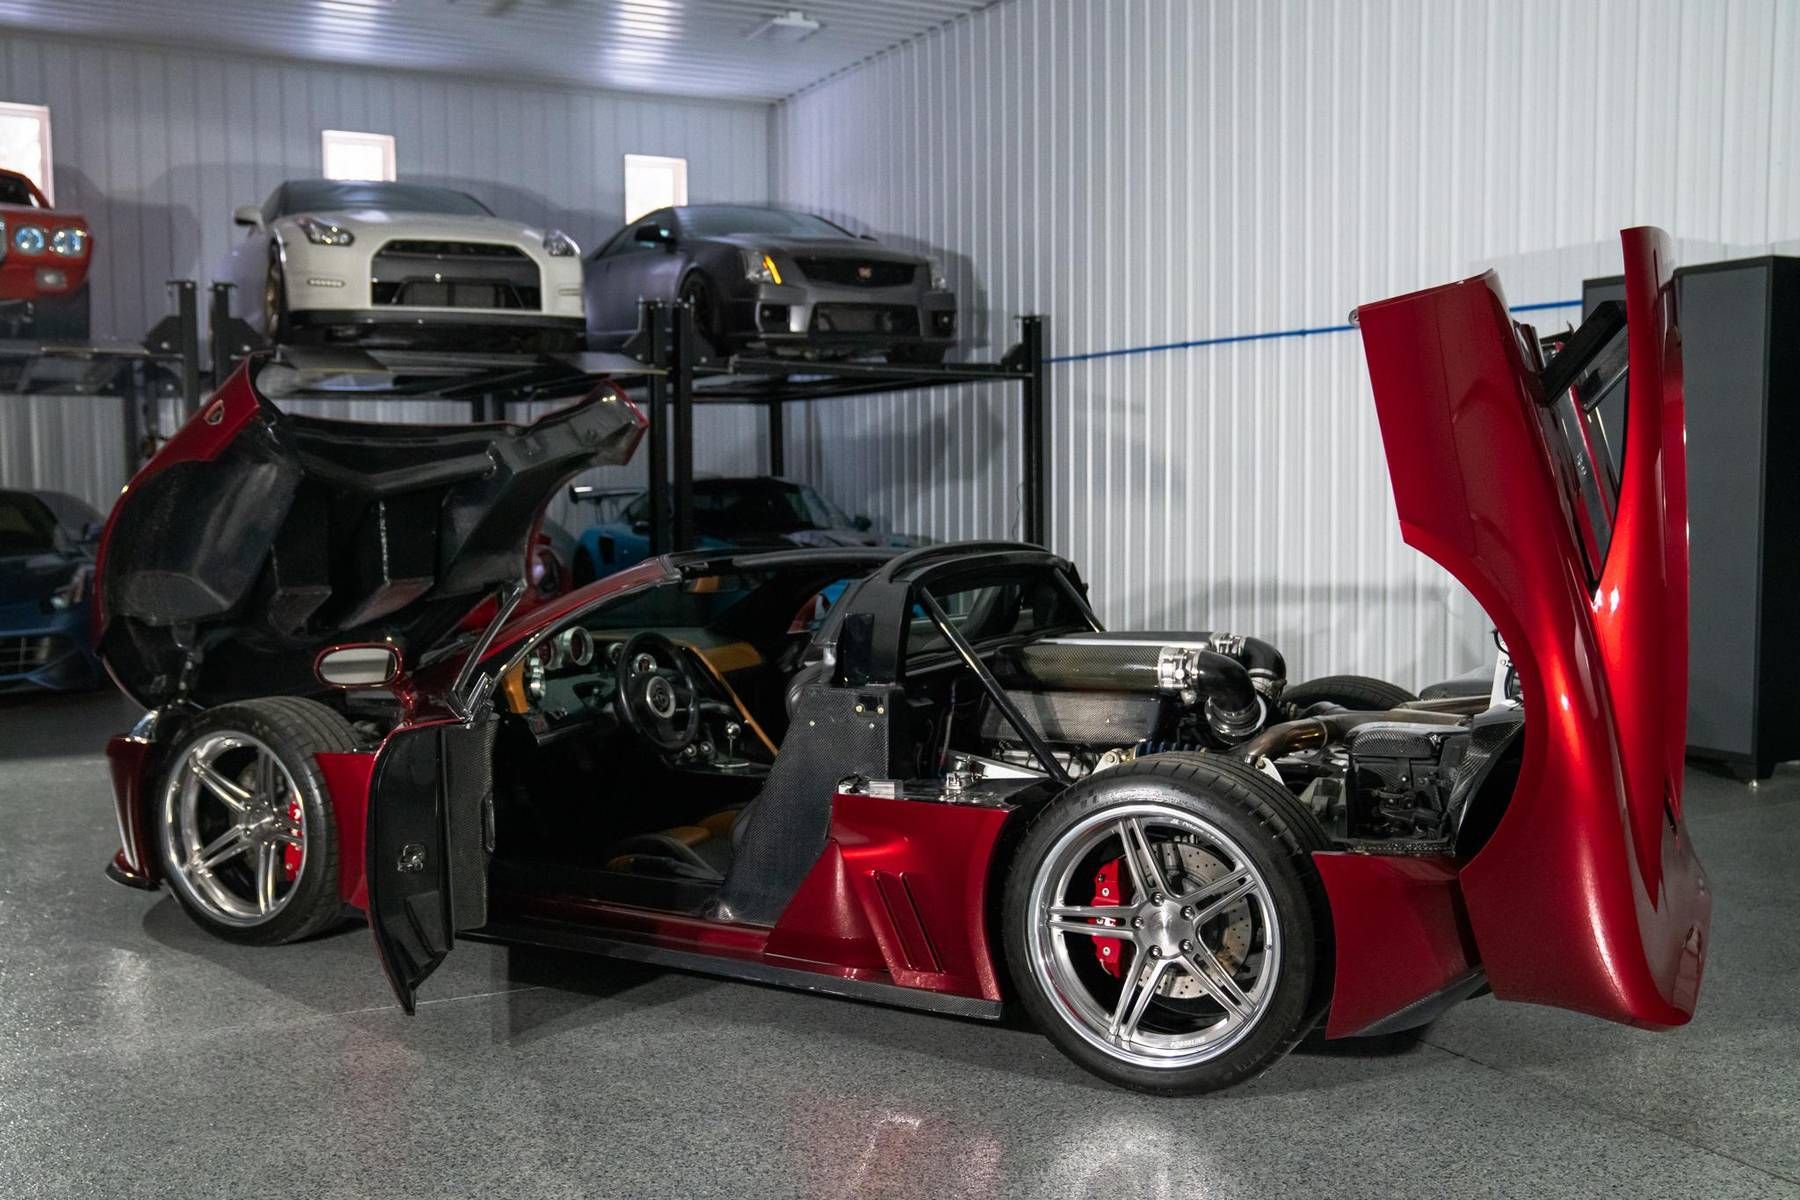 2014 Falcon F7 - The Supercar You Didn't Know Existed